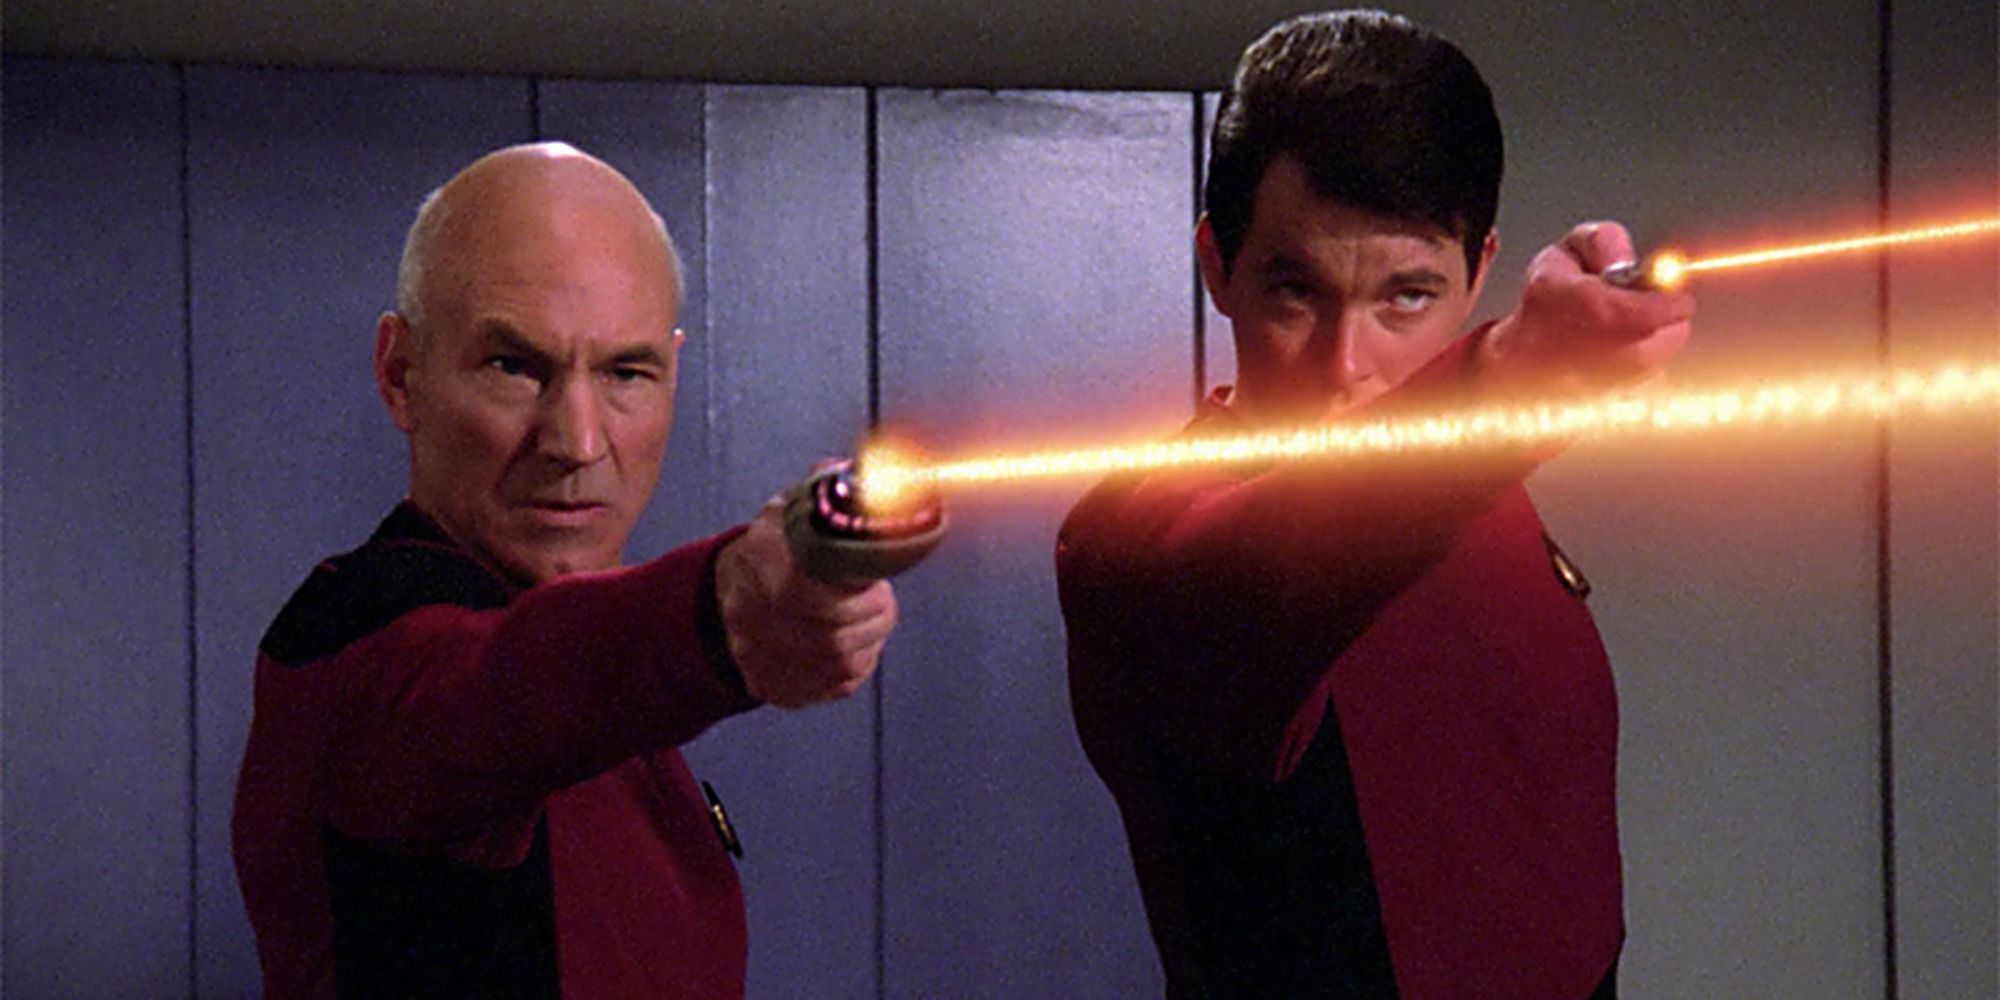 Picard and Riker fire their phasers in the Conspiracy episode of Star Trek: The Next Generation